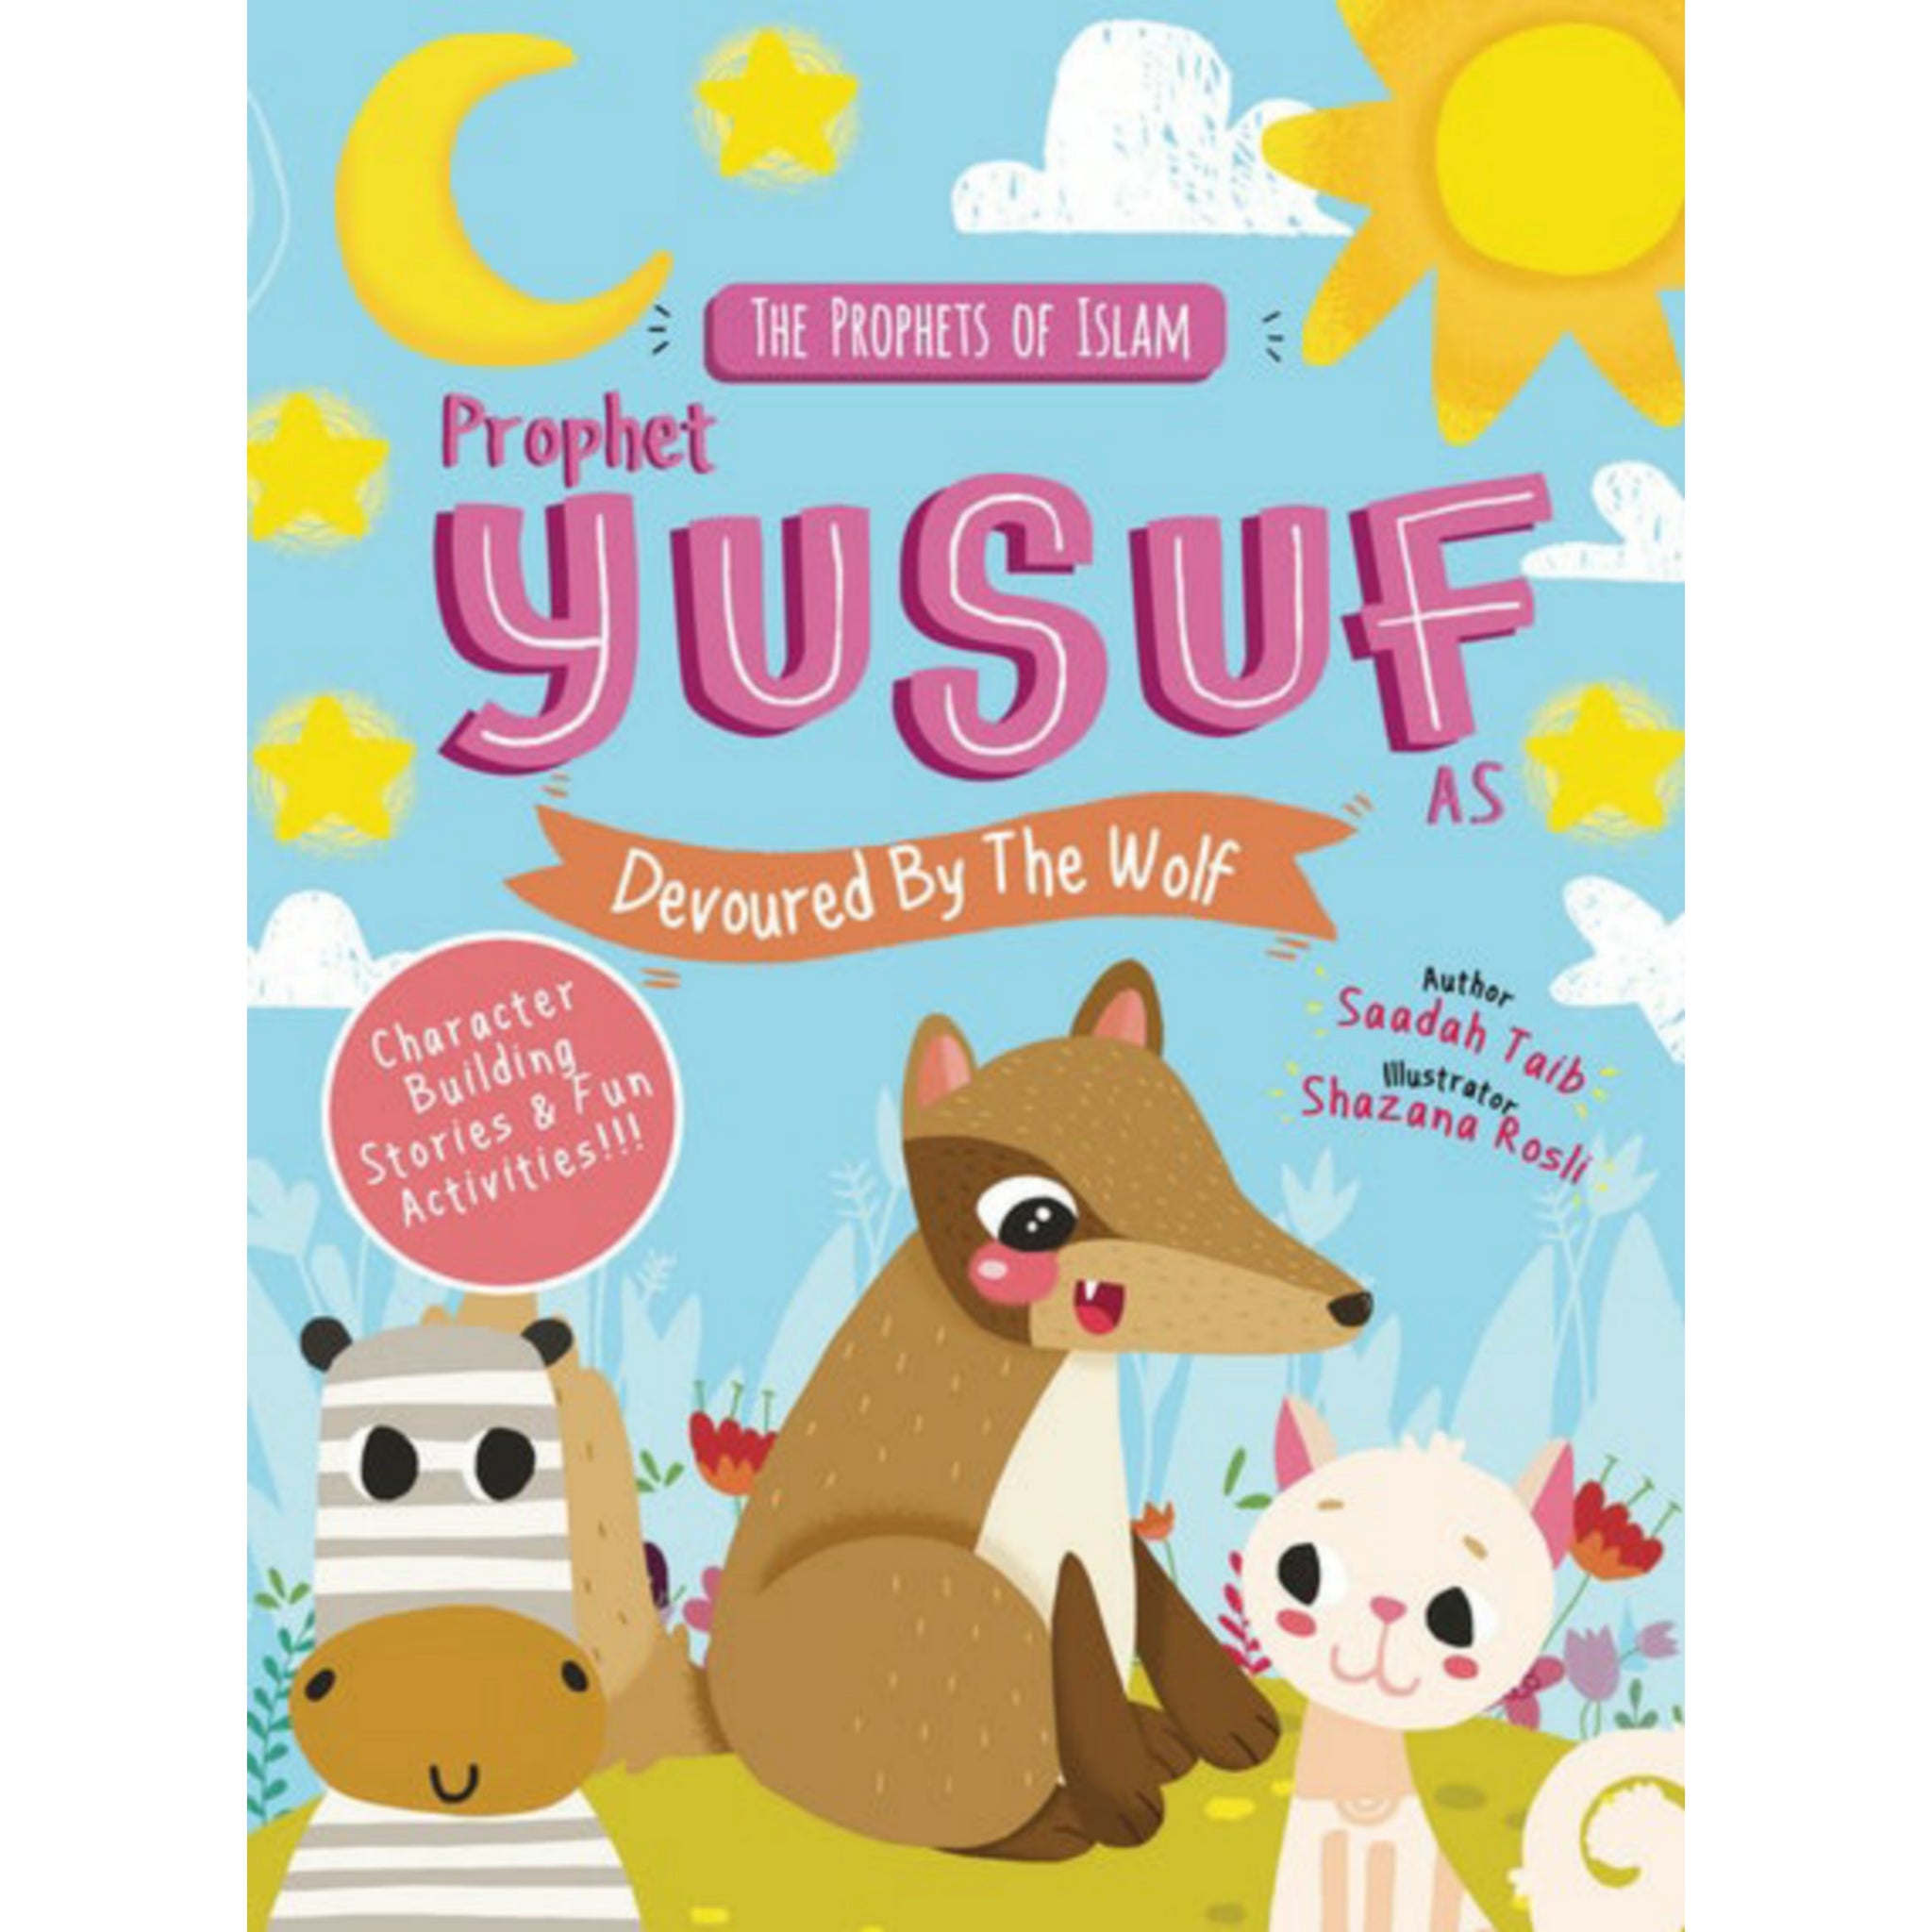 The Prophets of Islam: Prophet Yusuf Devoured by the Wolf